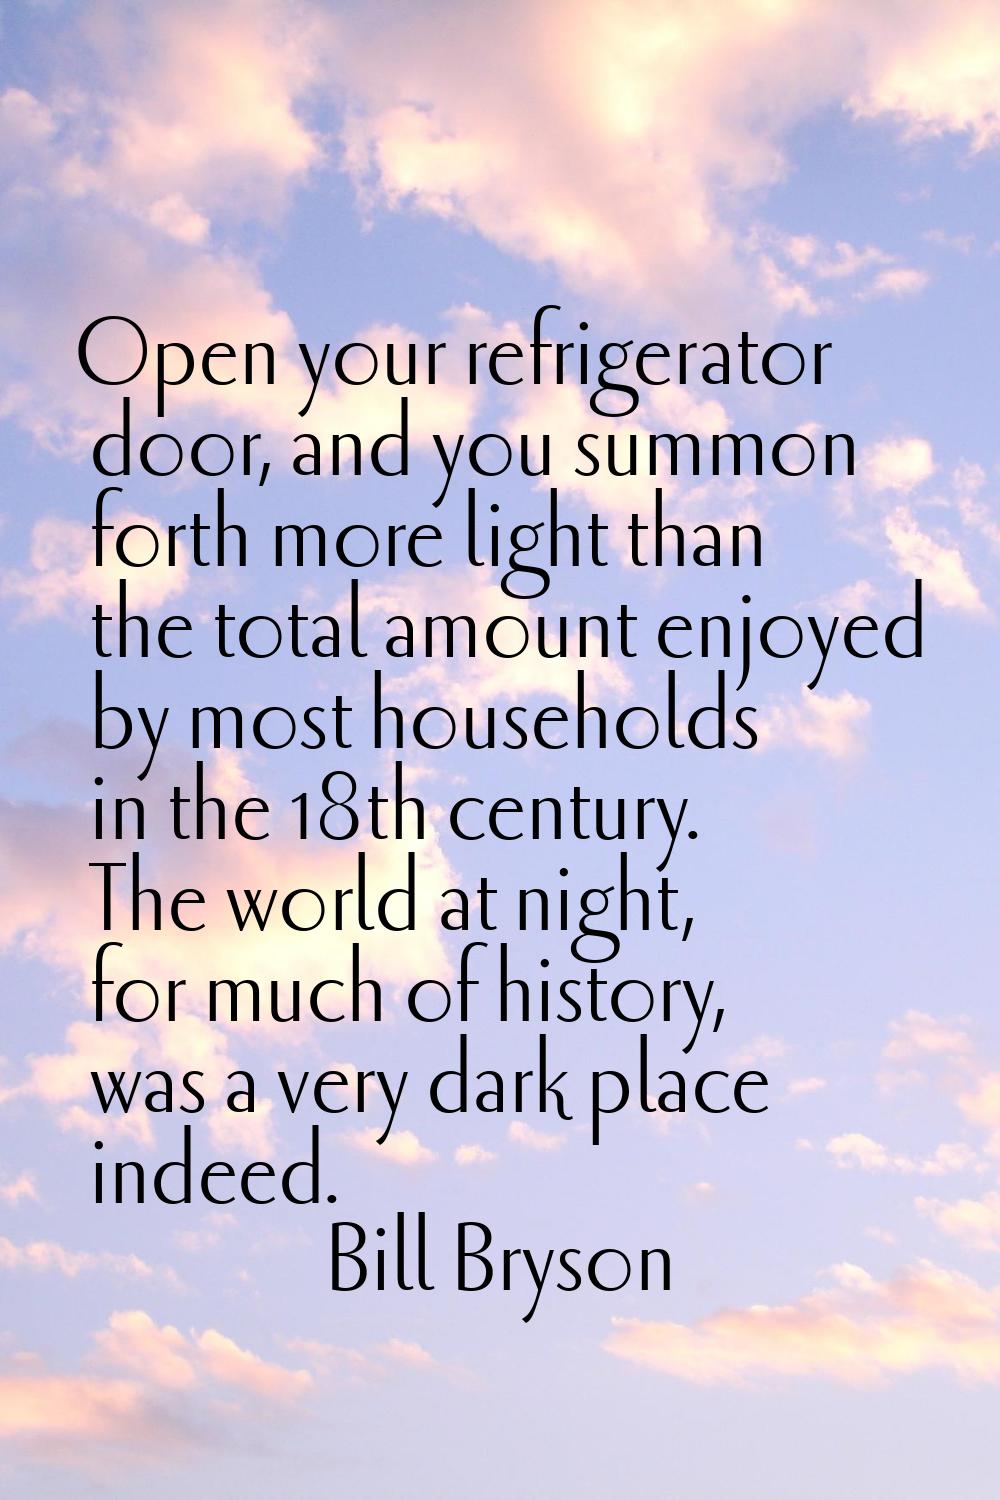 Open your refrigerator door, and you summon forth more light than the total amount enjoyed by most 